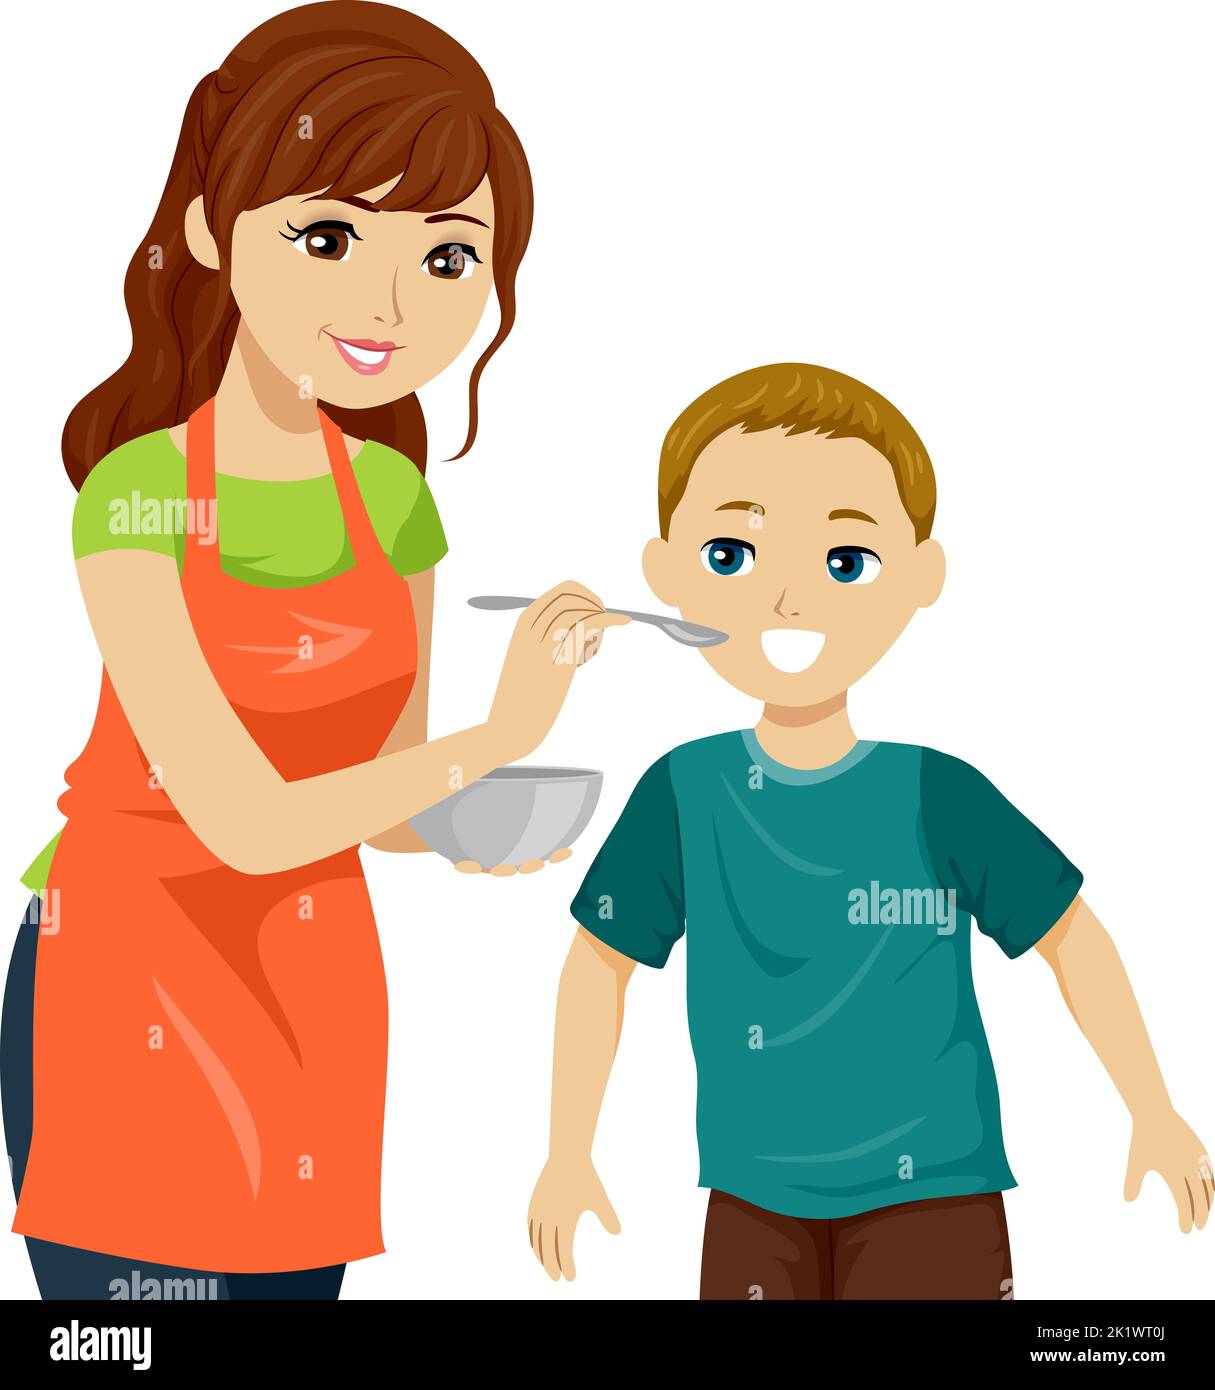 Illustration of Teen Girl Wearing Apron, Holding Bowl and Spoon Asking Brother to Taste Food While Cooking Stock Photo